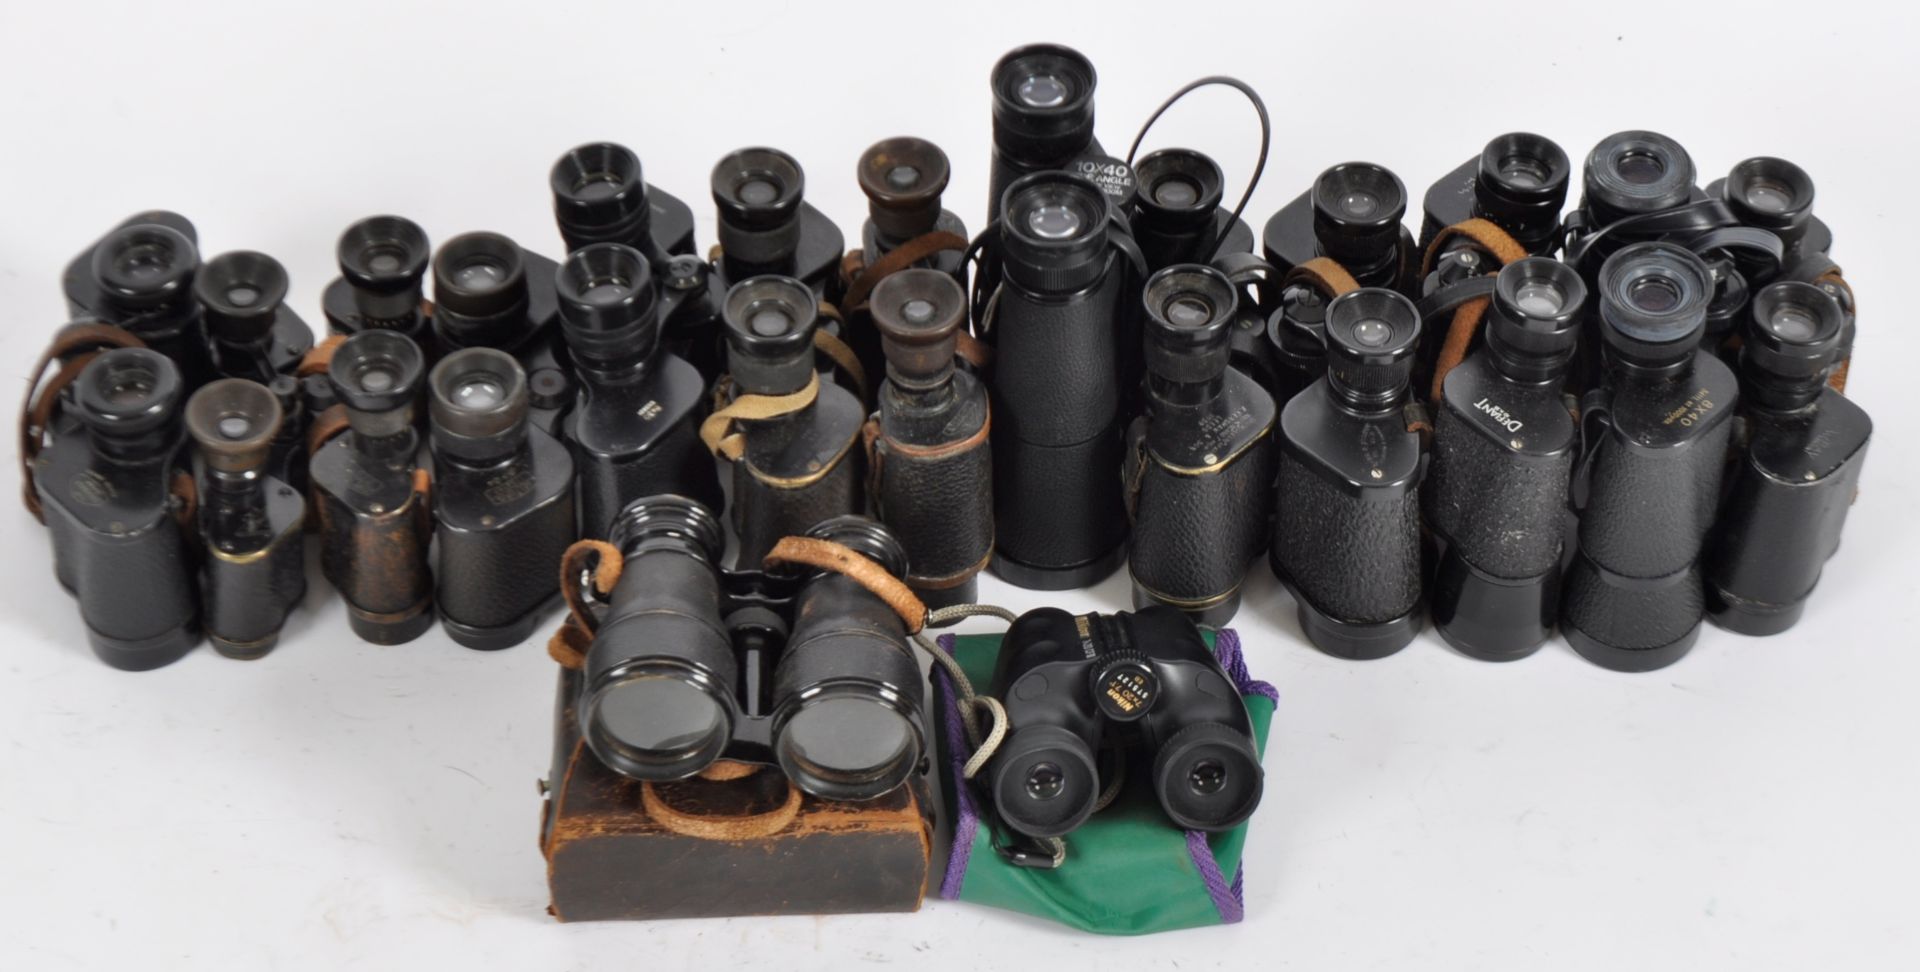 MIXED COLLECTION OF VINTAGE BINOCULARS INCLUDING MILITARY ISSUE - Image 3 of 6